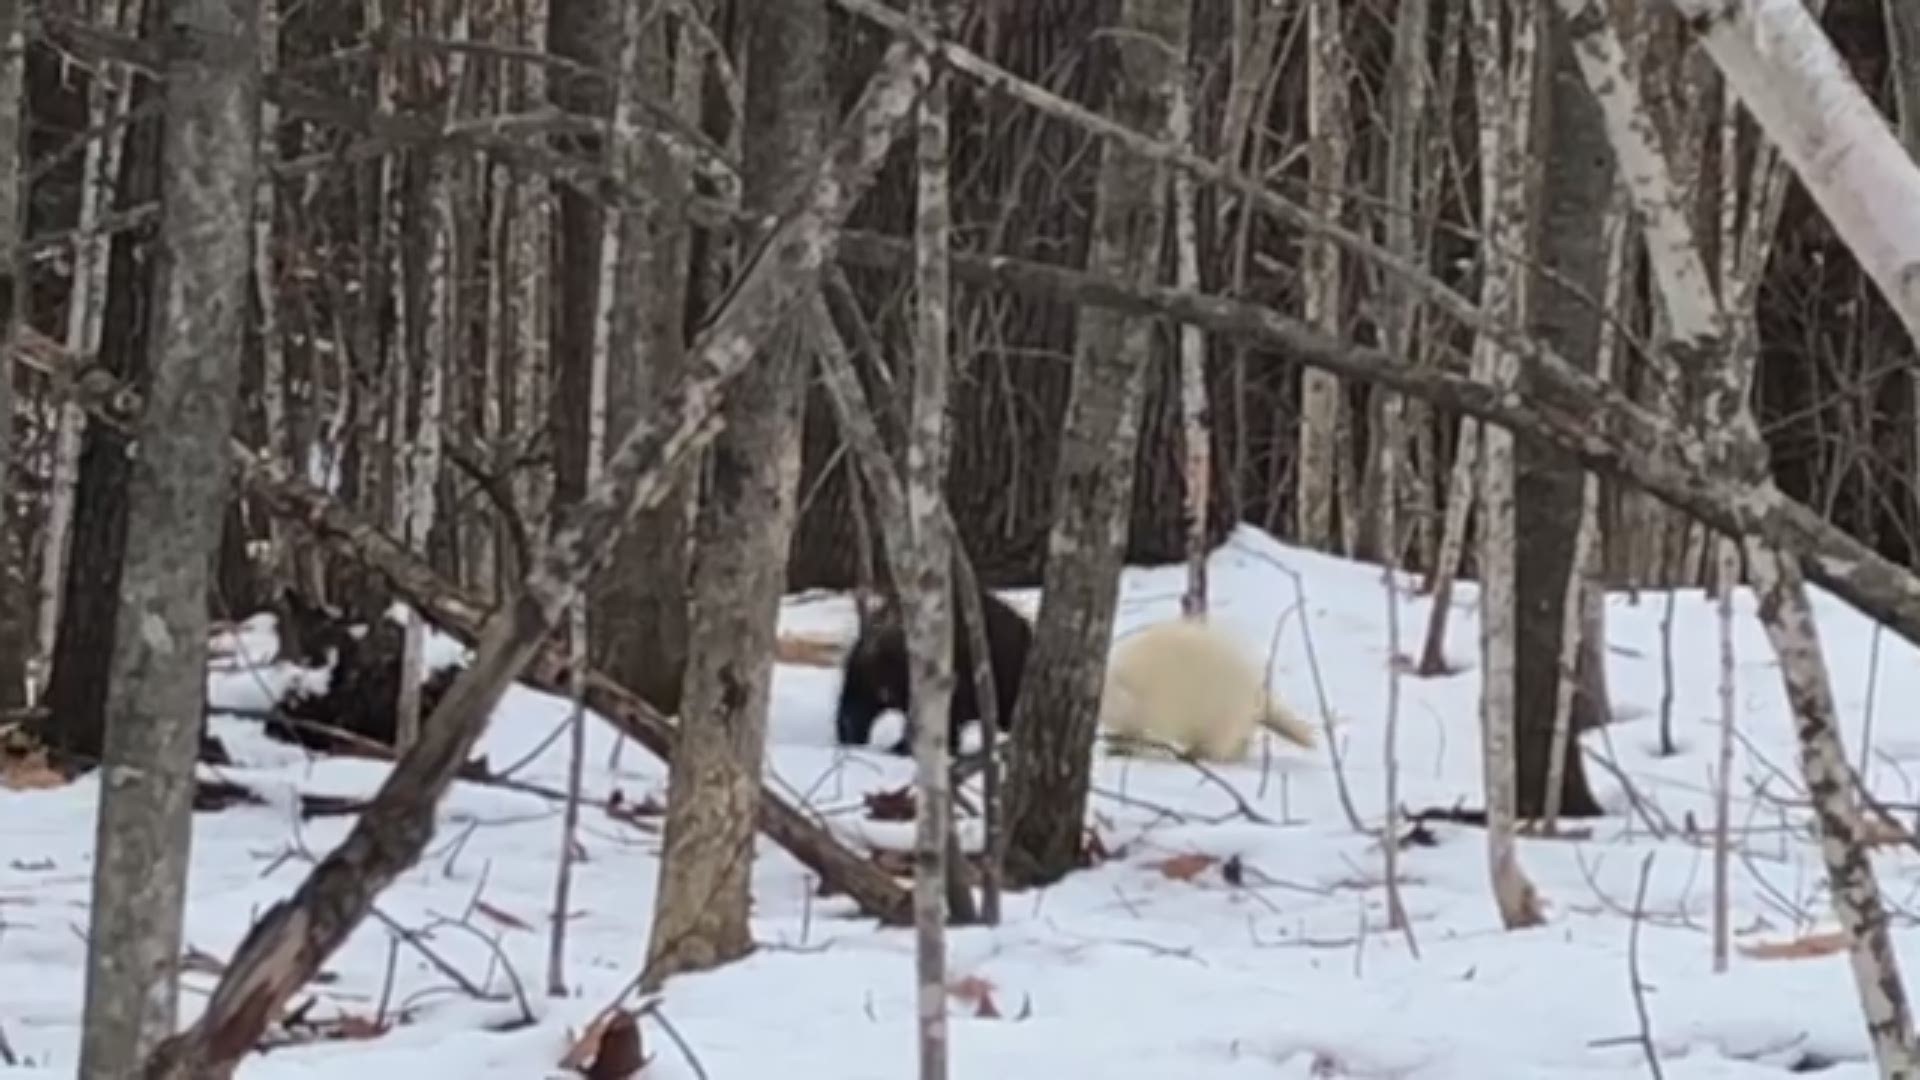 Greg Strand captured a rare albino porcupine, appearing to be young, in the Windham Woods on December 6.